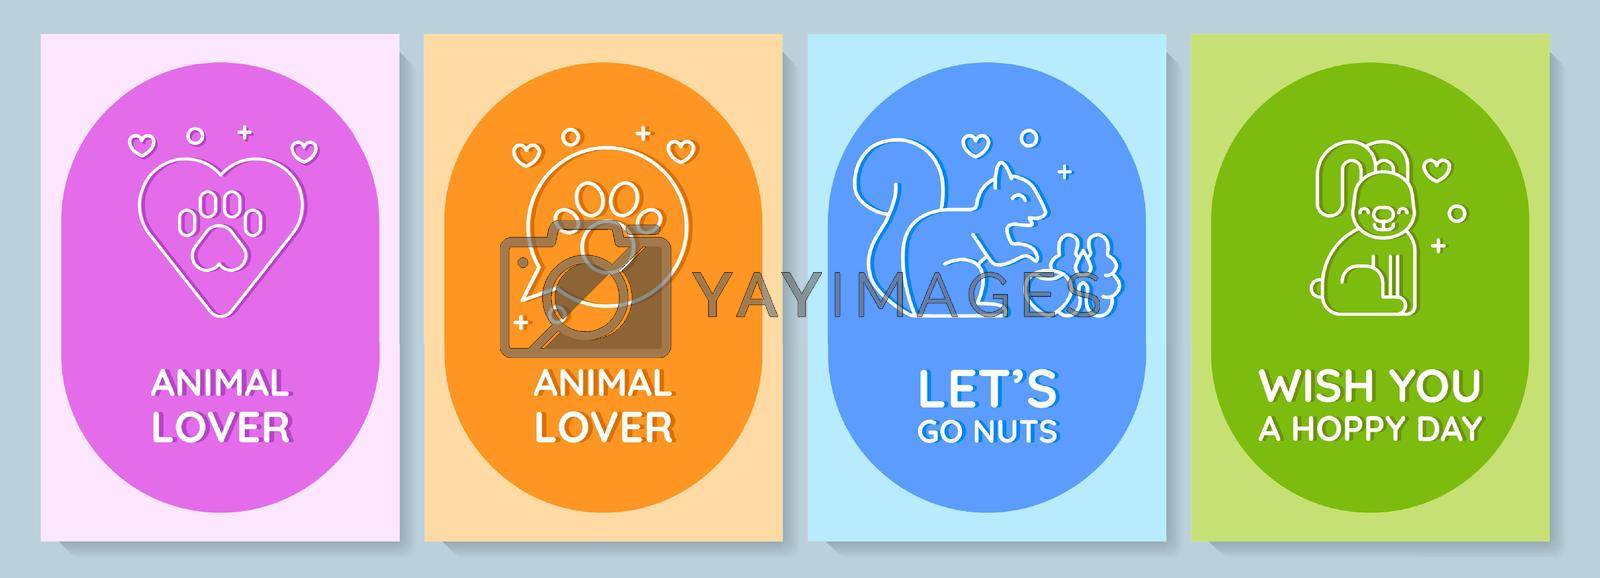 Love your pet day celebration postcard with linear glyph icon set. Greeting card with decorative vector design. Simple style poster with creative lineart illustration. Flyer with holiday wish